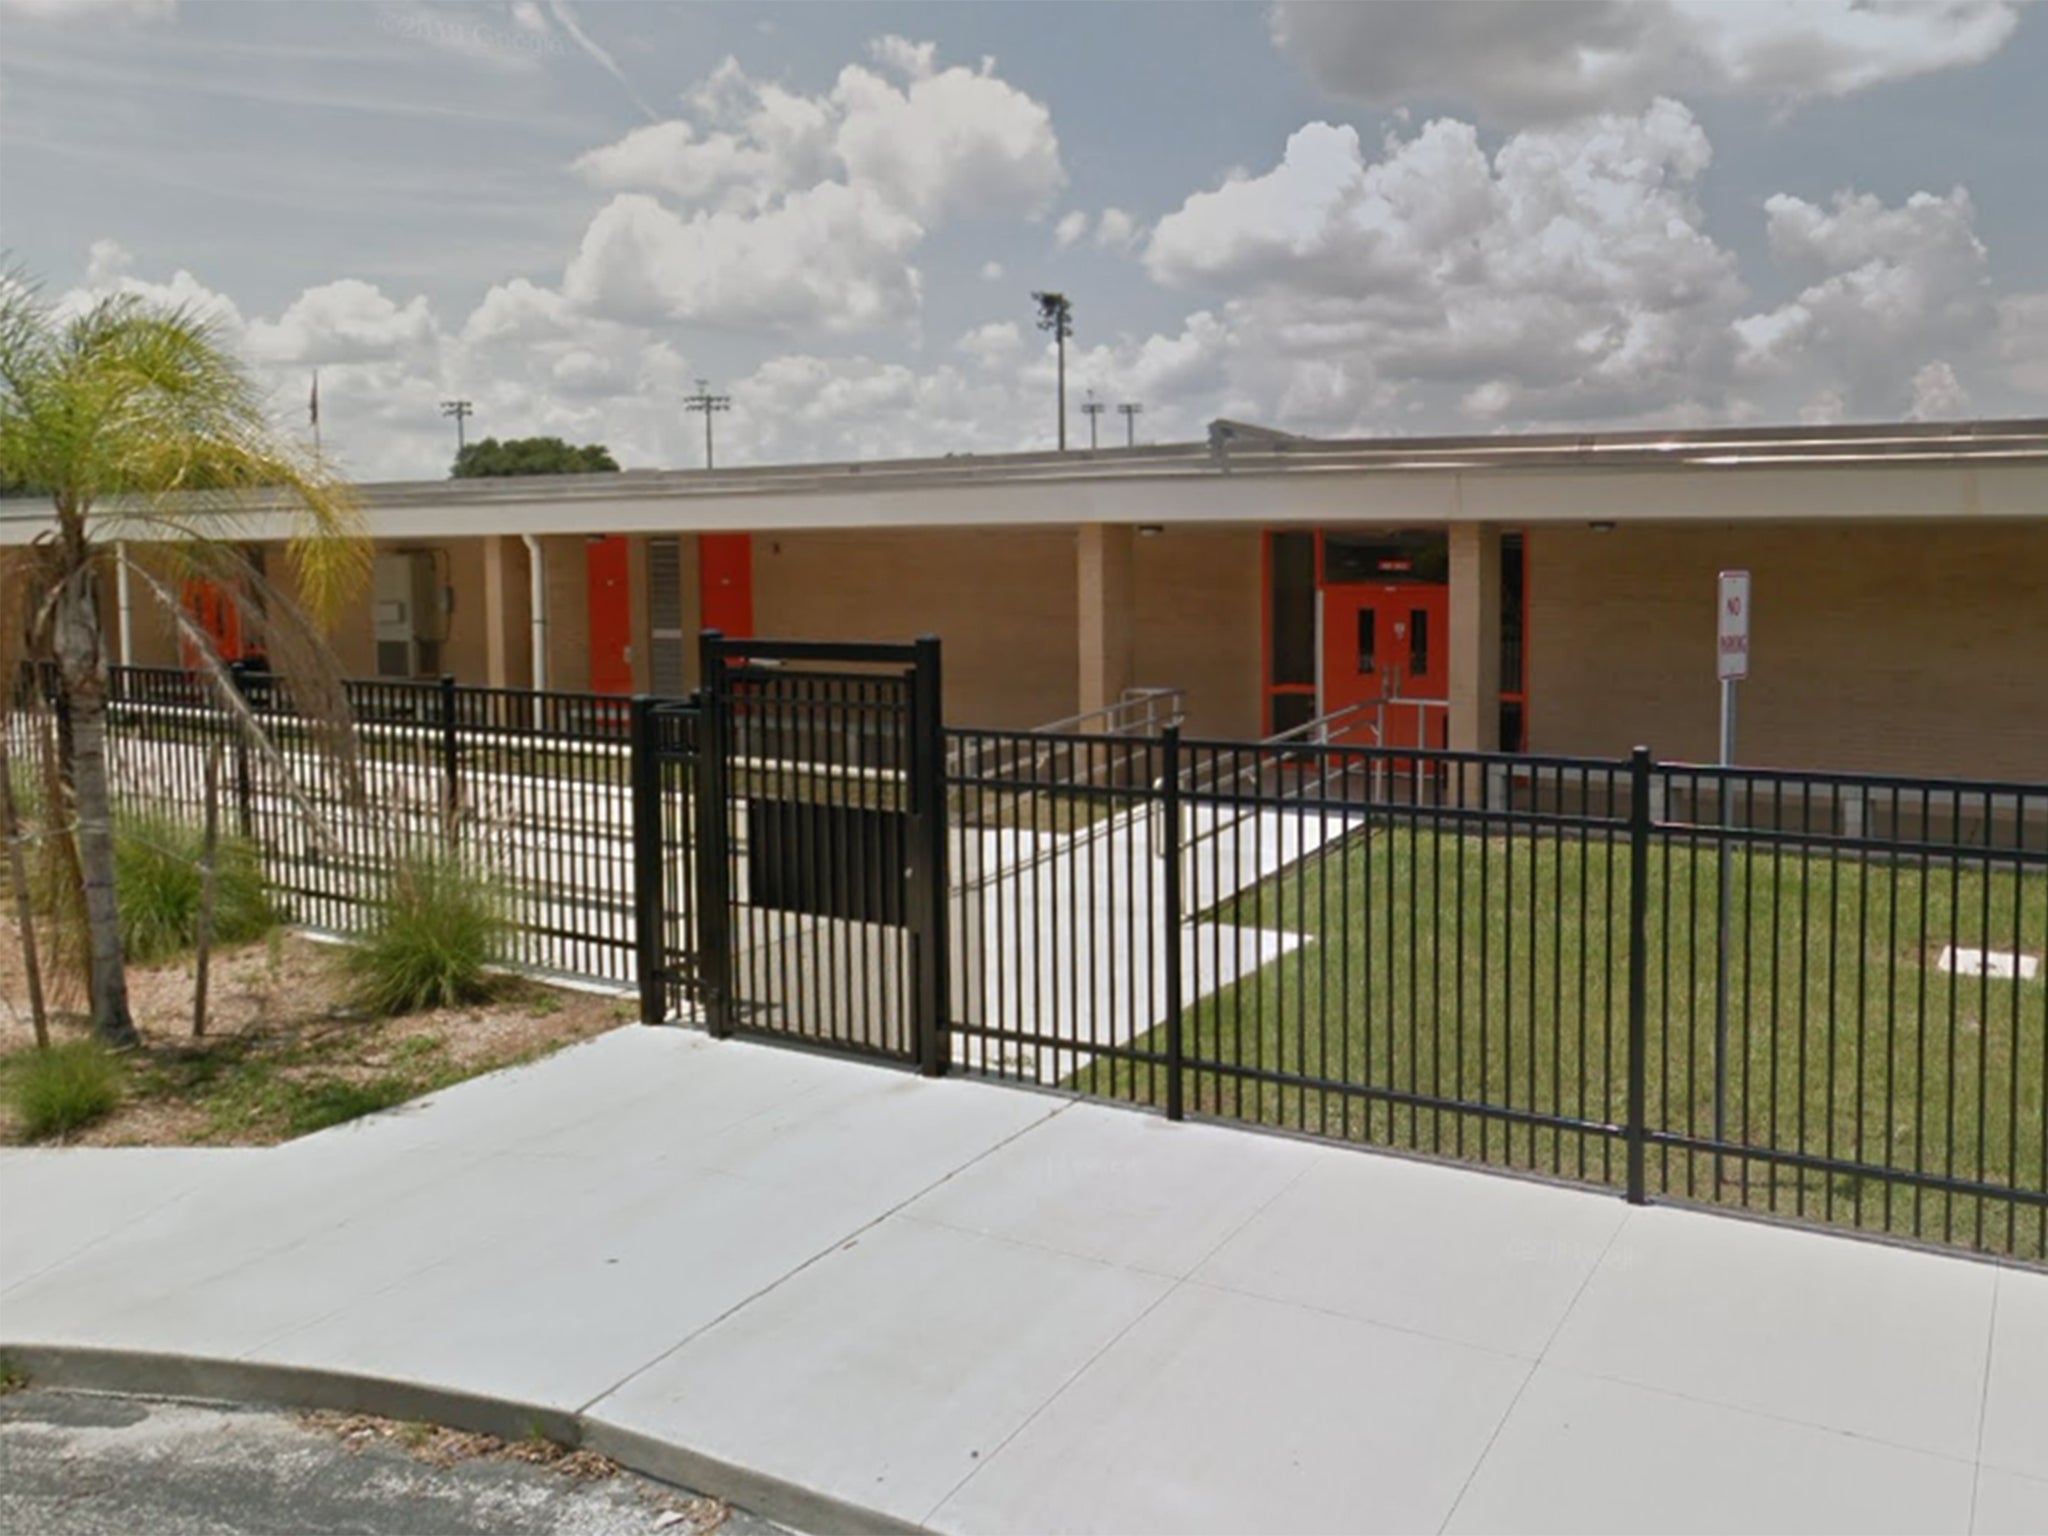 The incident took place at Bartow Middle School, Florida